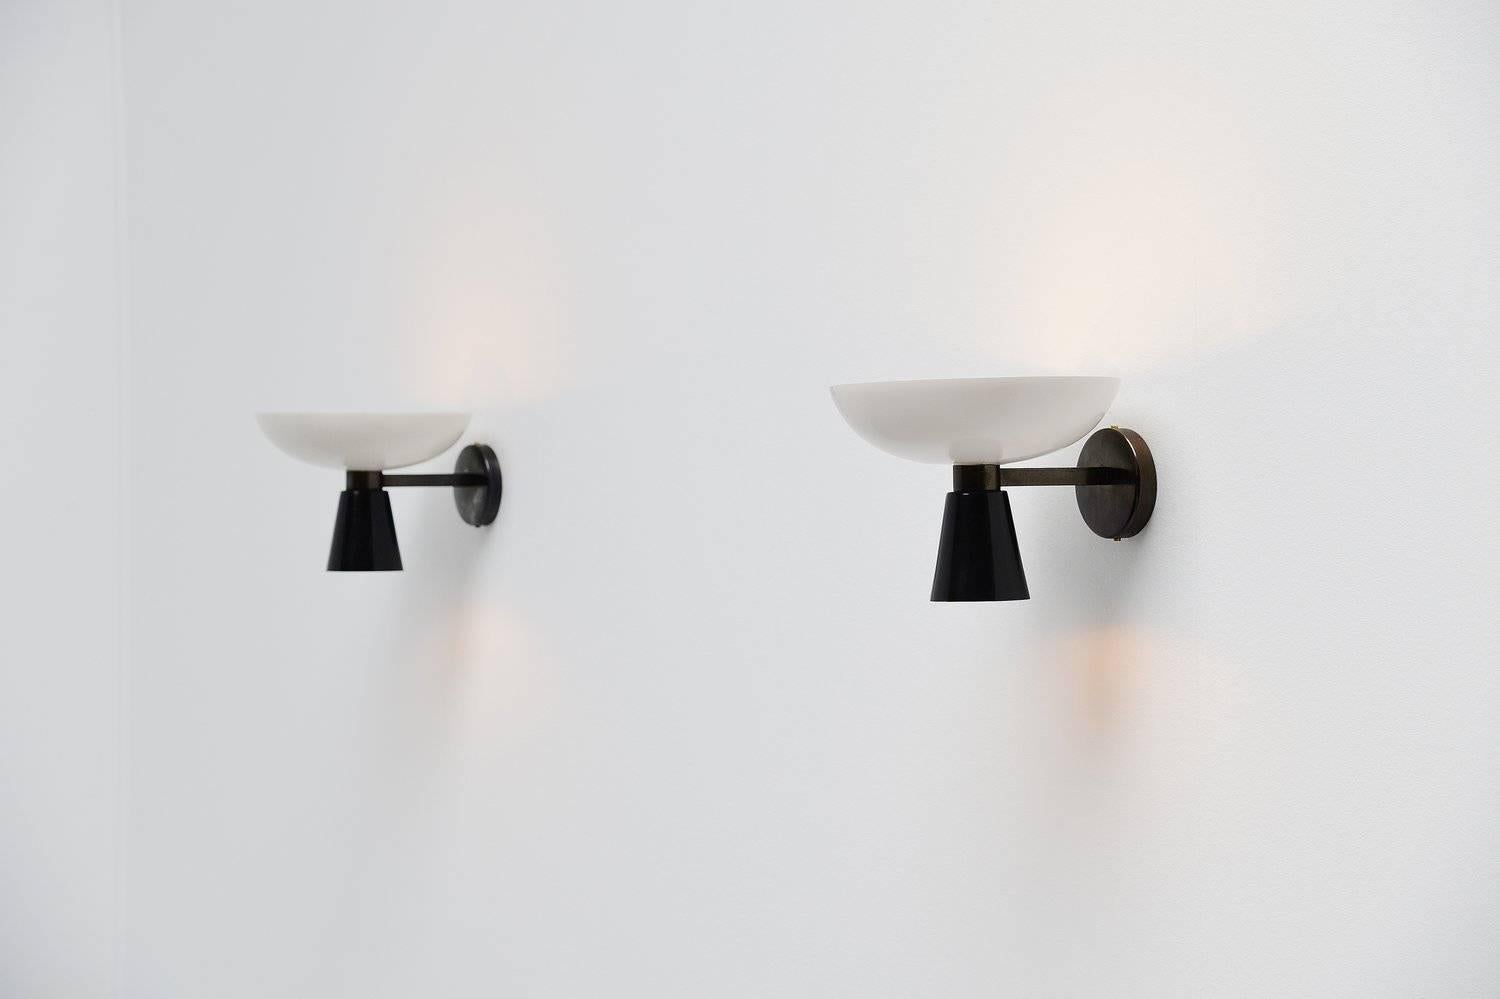 Italian pair of wall lamps diabolo shades in black and white with brass arm by Stilnovo, Italy 1950. These wall lamps have black and whit lacquered shades, they have been refinished but they have the original colors. The arm is made of patinated